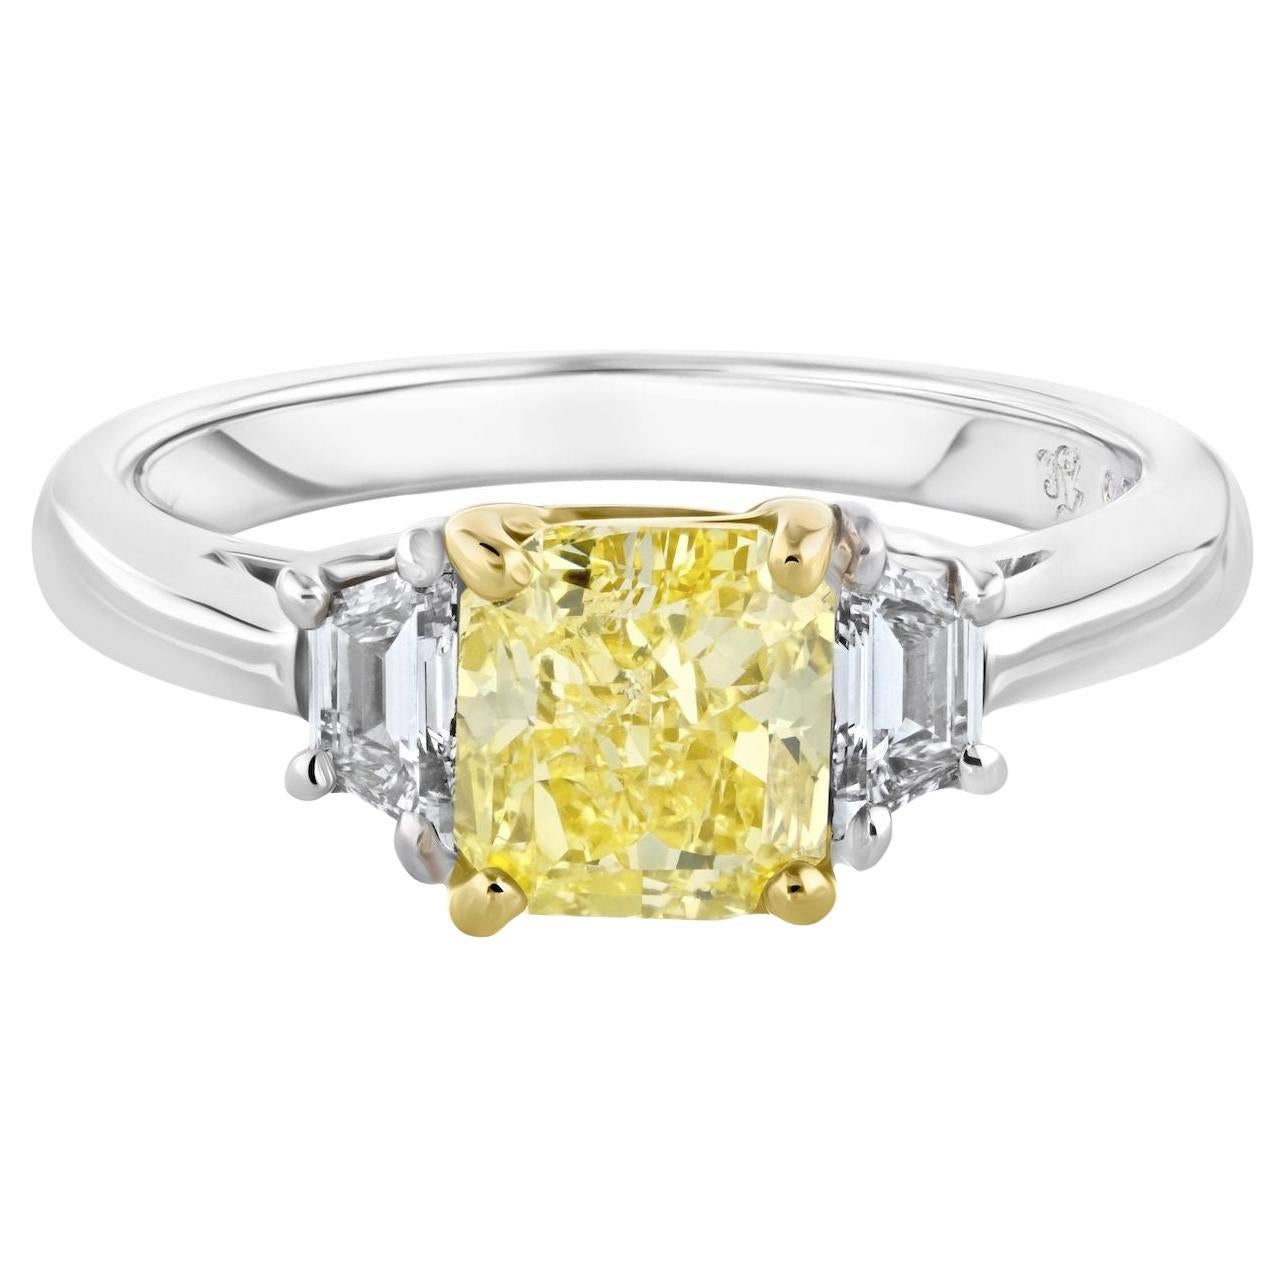 1.51 ct Fancy Intense Yellow Three Stone Diamond Engagement Ring For Sale